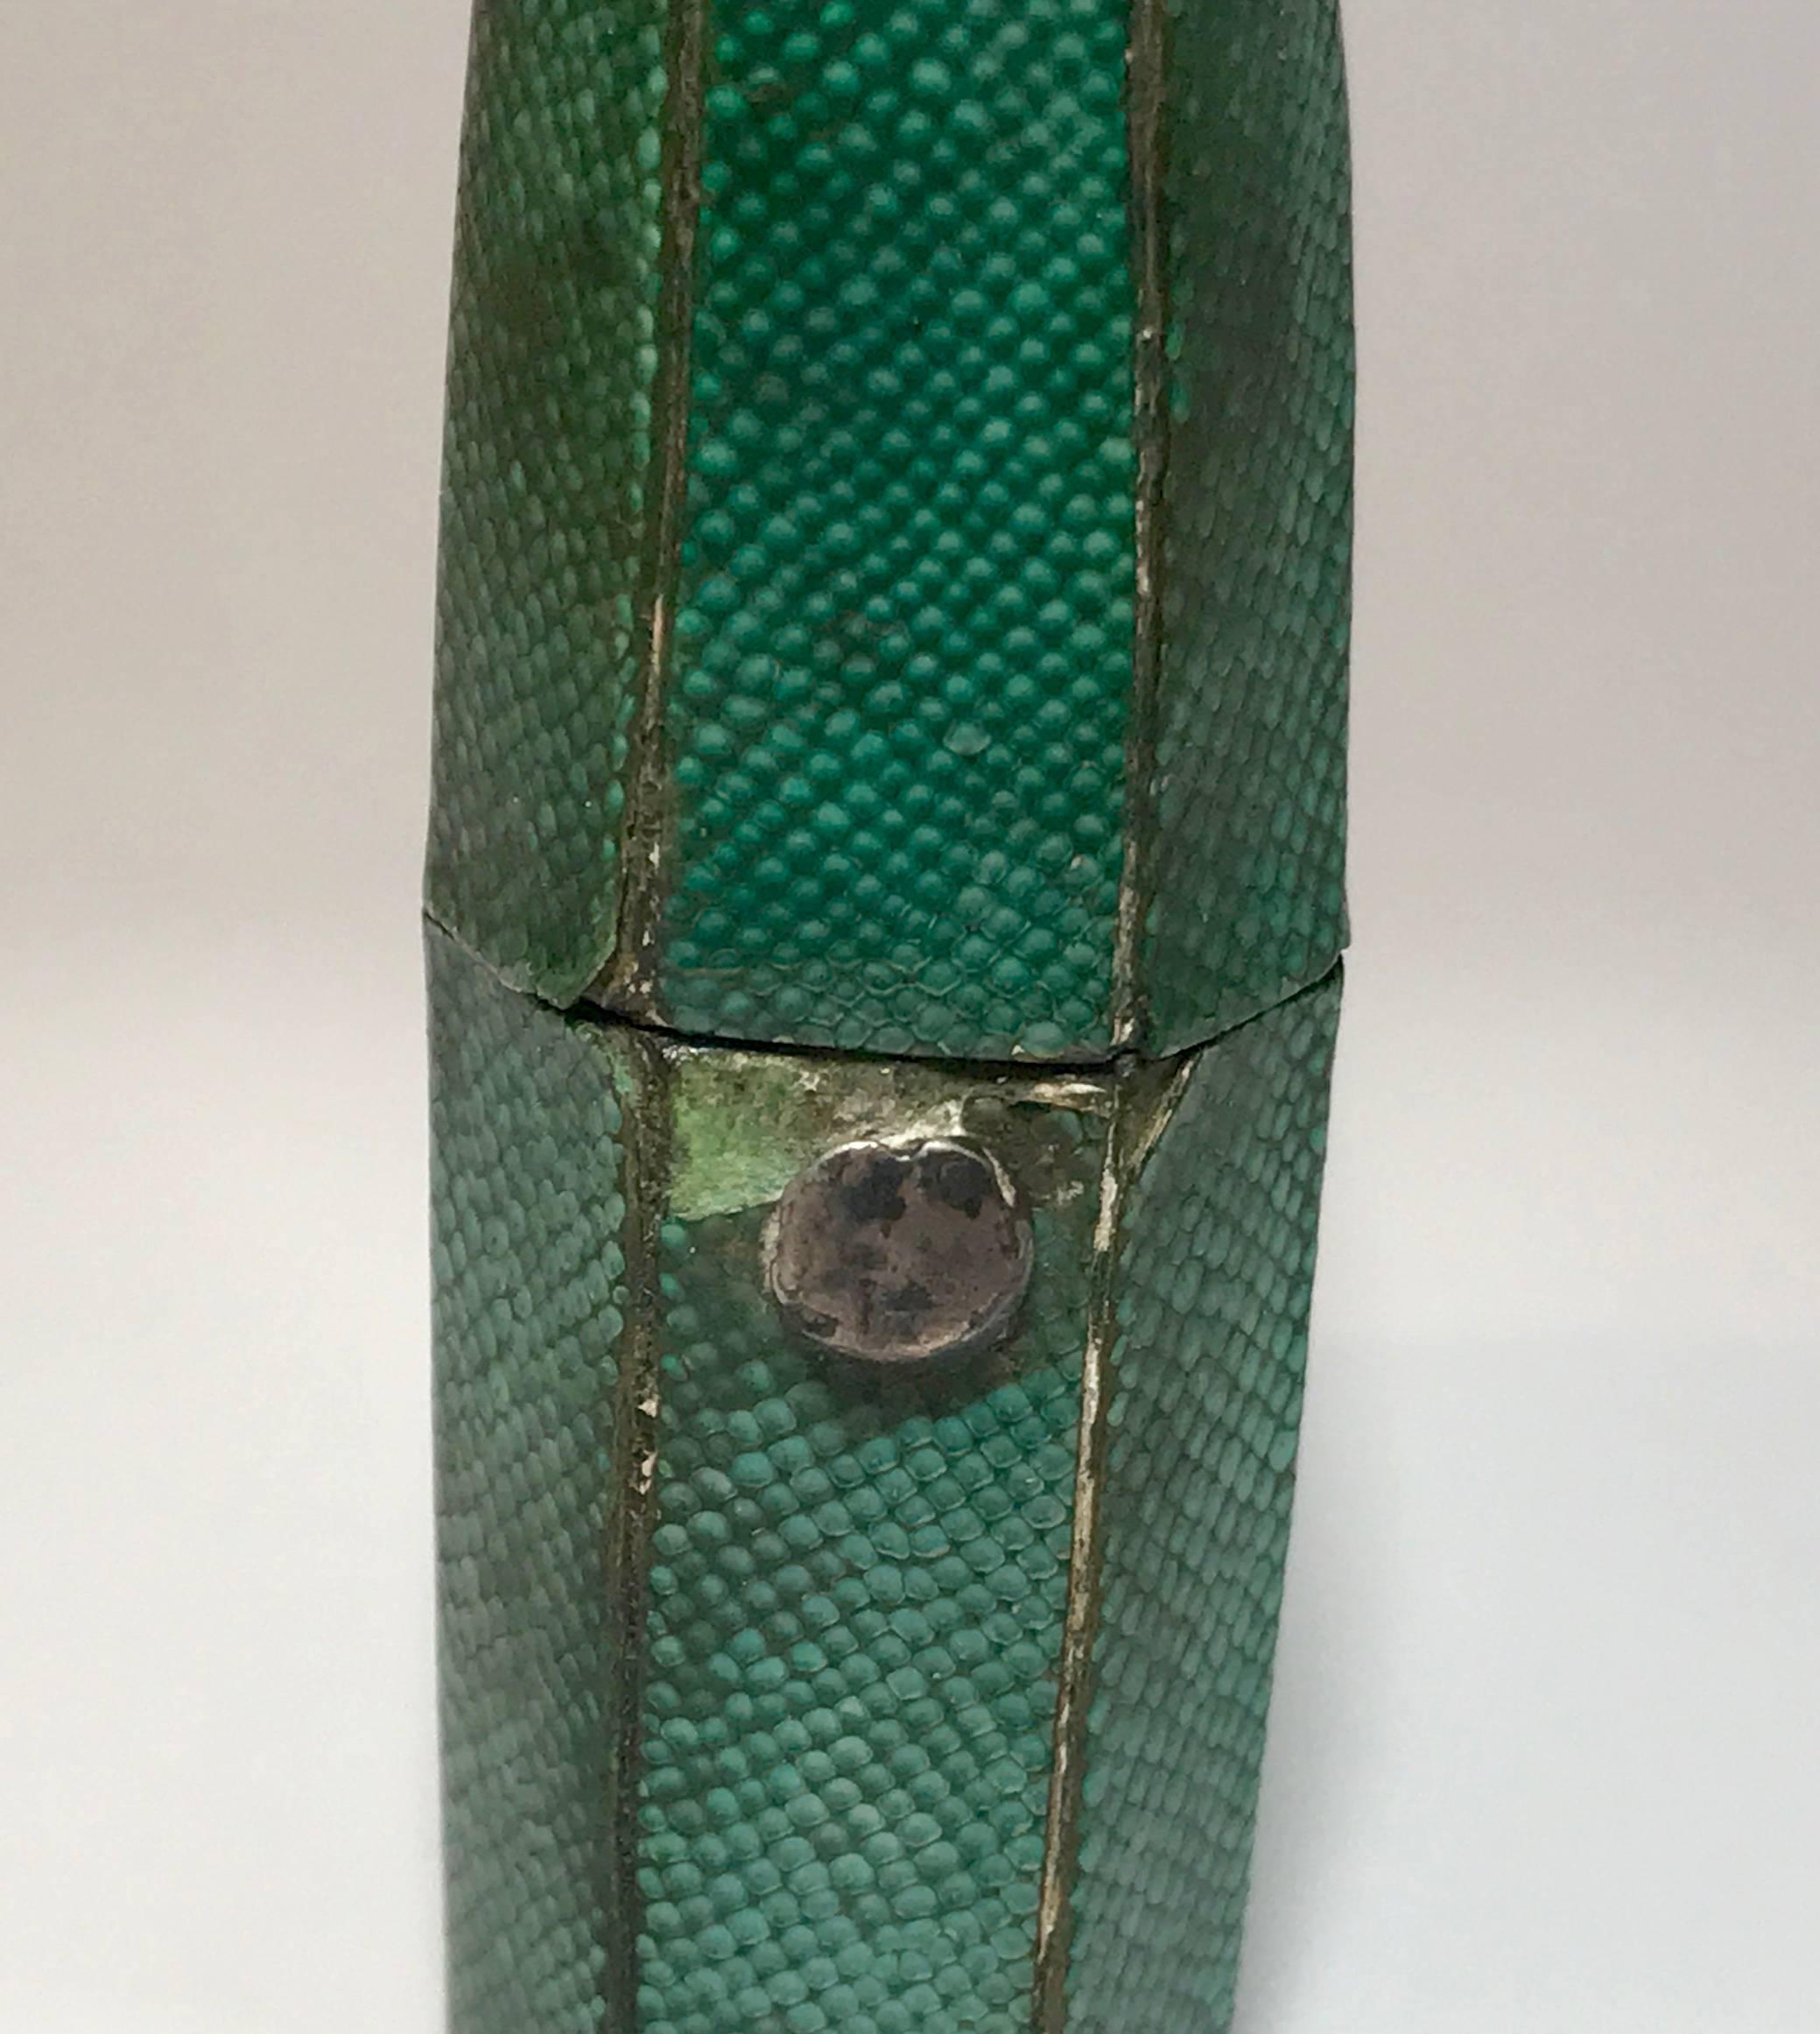 18th century English shagreen perfume case with two glass perfume bottles.